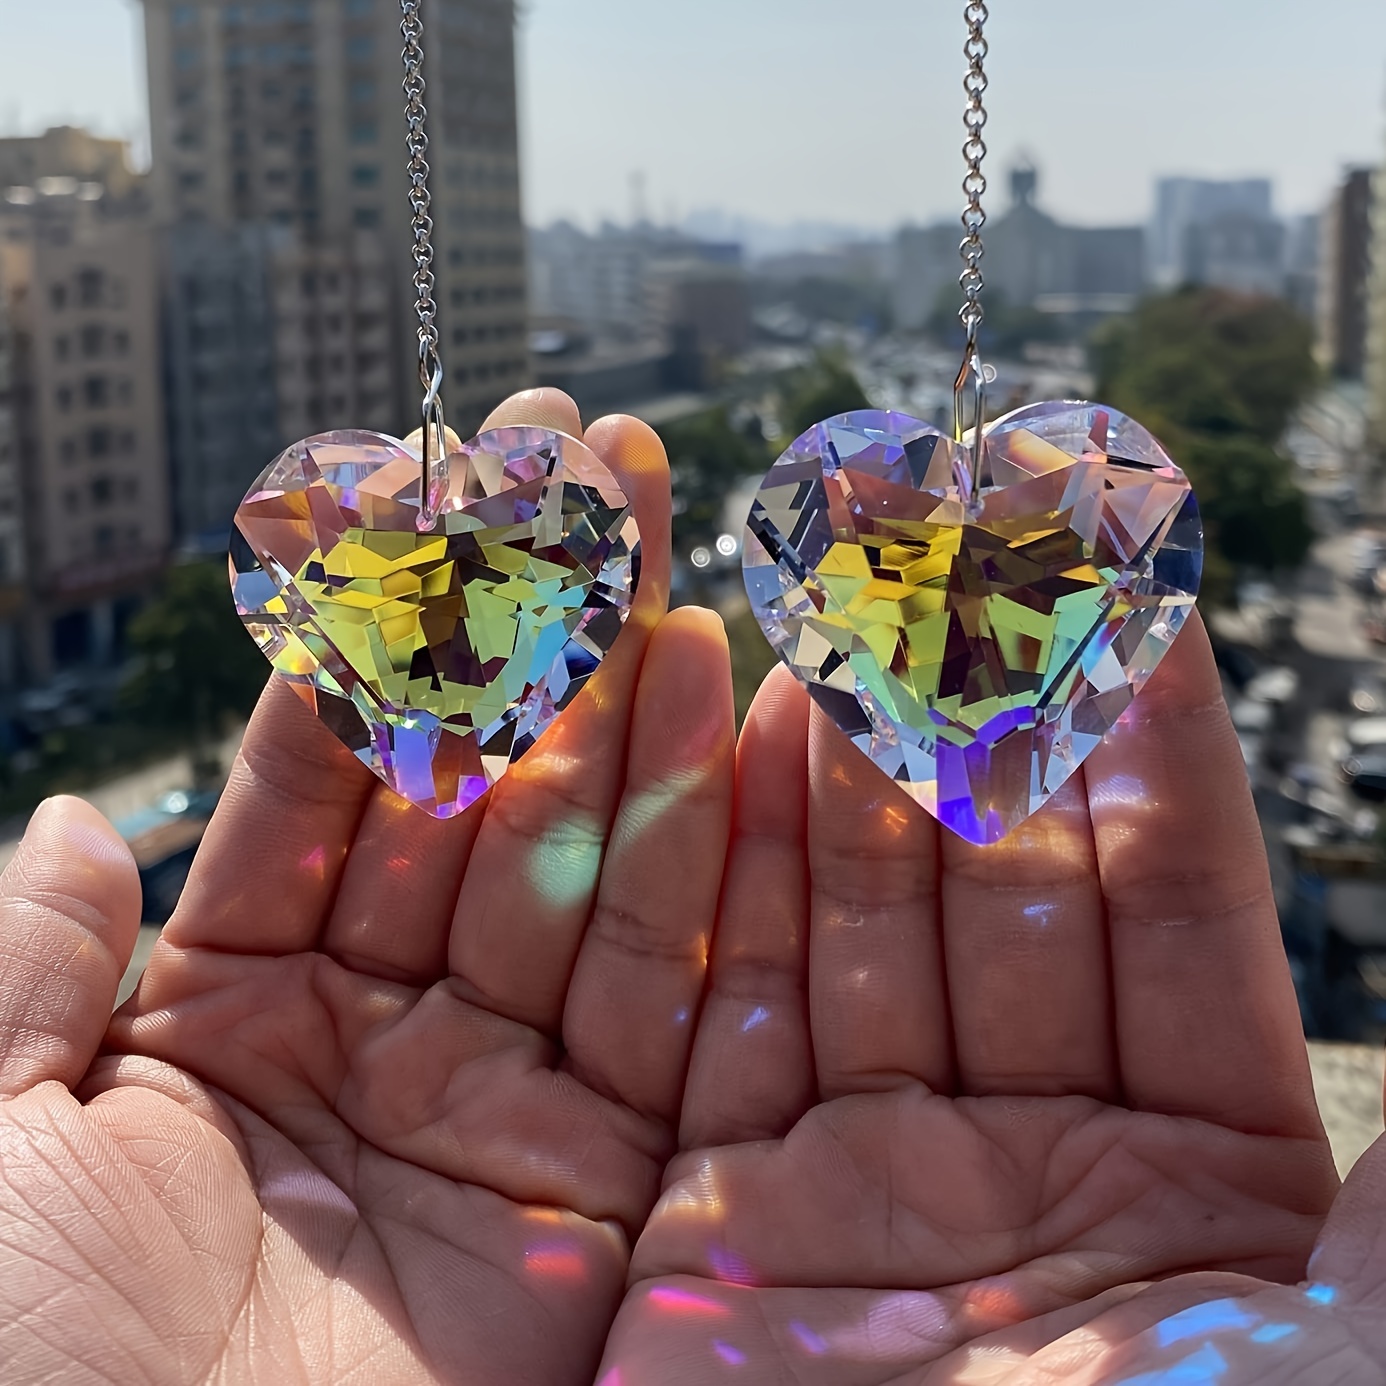 

2pcs Heart Crystal Suncatchers, Rainbow Maker For Window, Hanging Sun Catchers With Glass Prism For Balcony, Kitchen, Garden